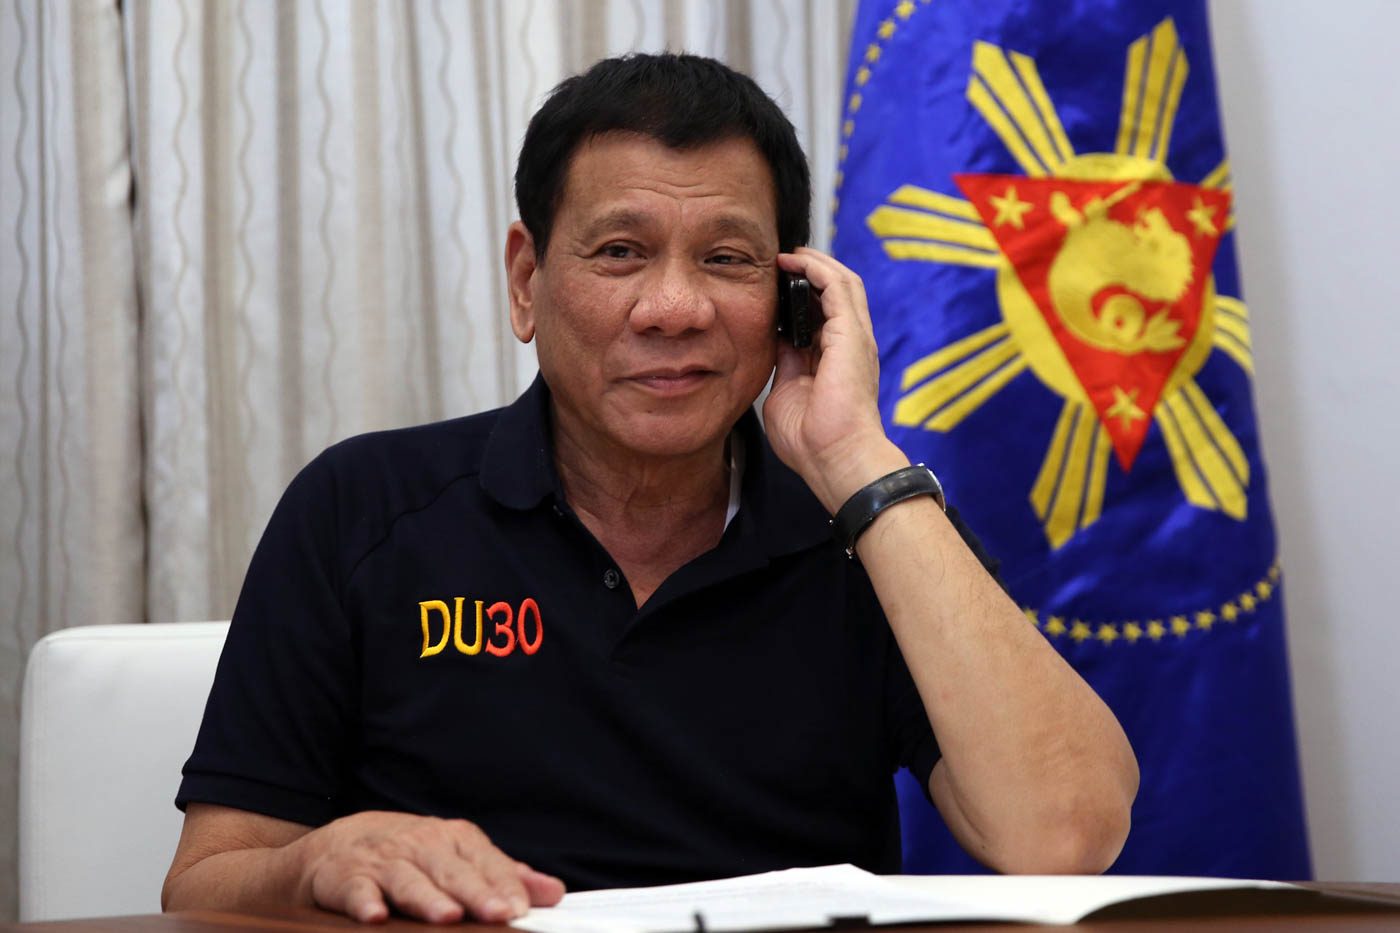 Duterte shares his struggles with smartphones, Viber